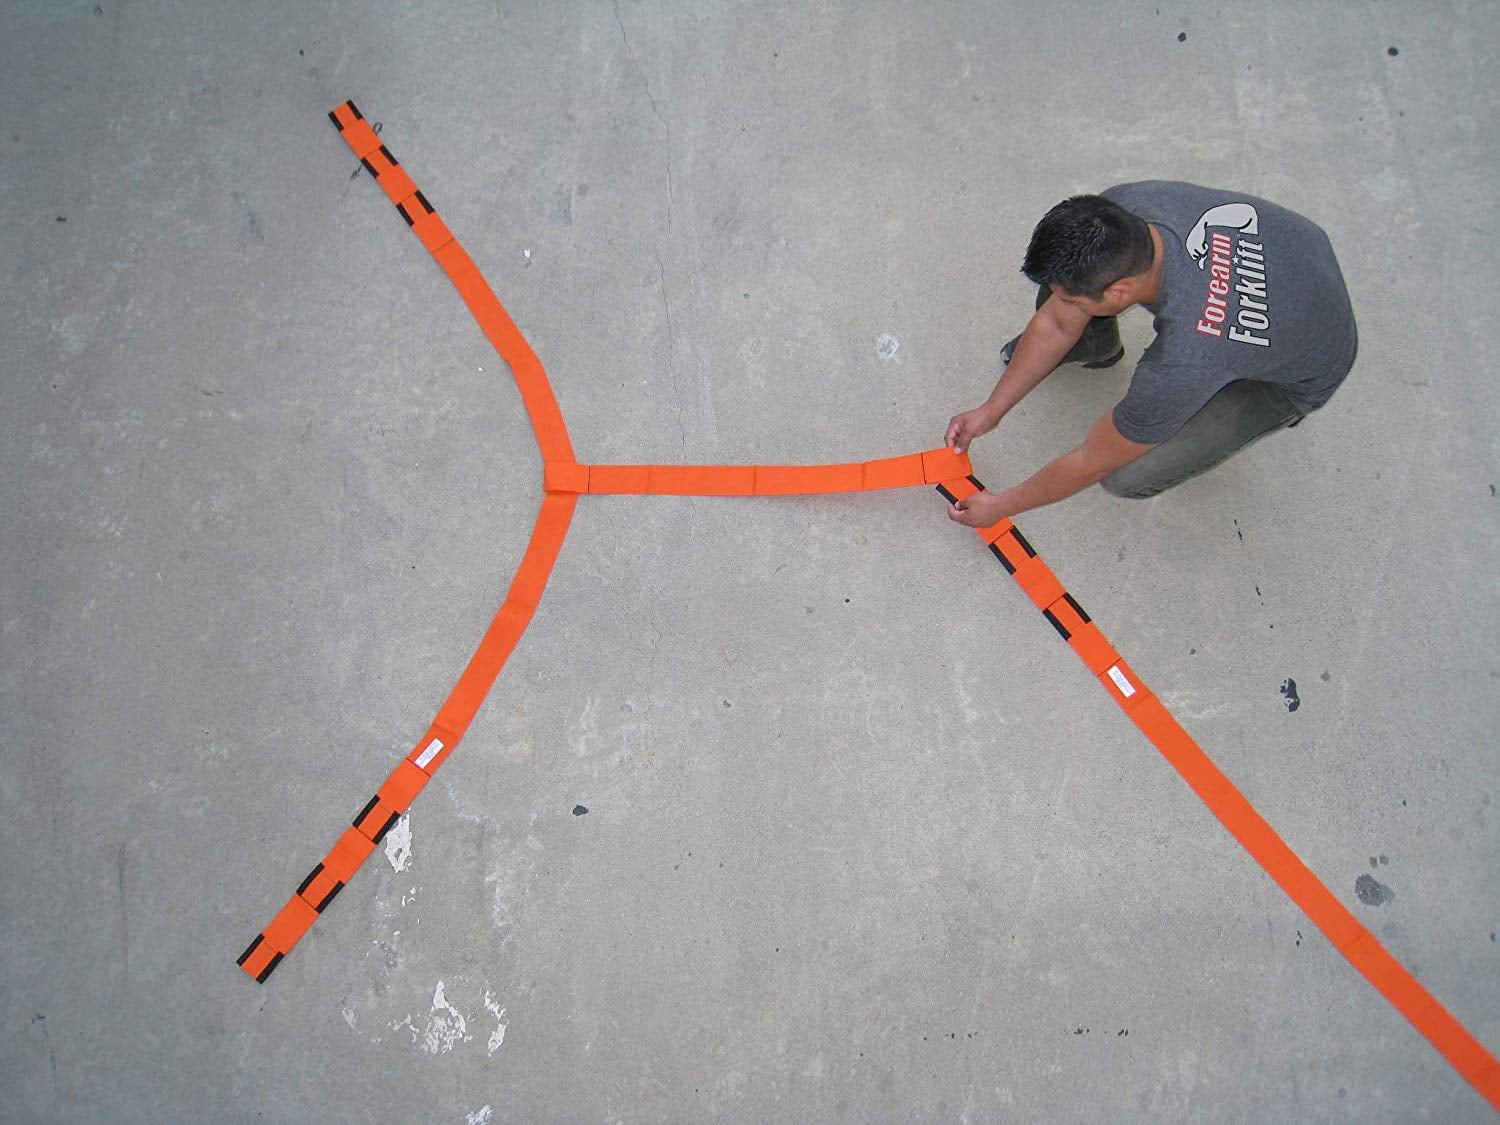 Extension For Use With Lifting Straps Or Harness Adds An Additional 3 5 Feet Model Ext Orange For Use With Forearm Forklift Lifting Straps Moving Harnesses To By Forearm Forklift Walmart Com